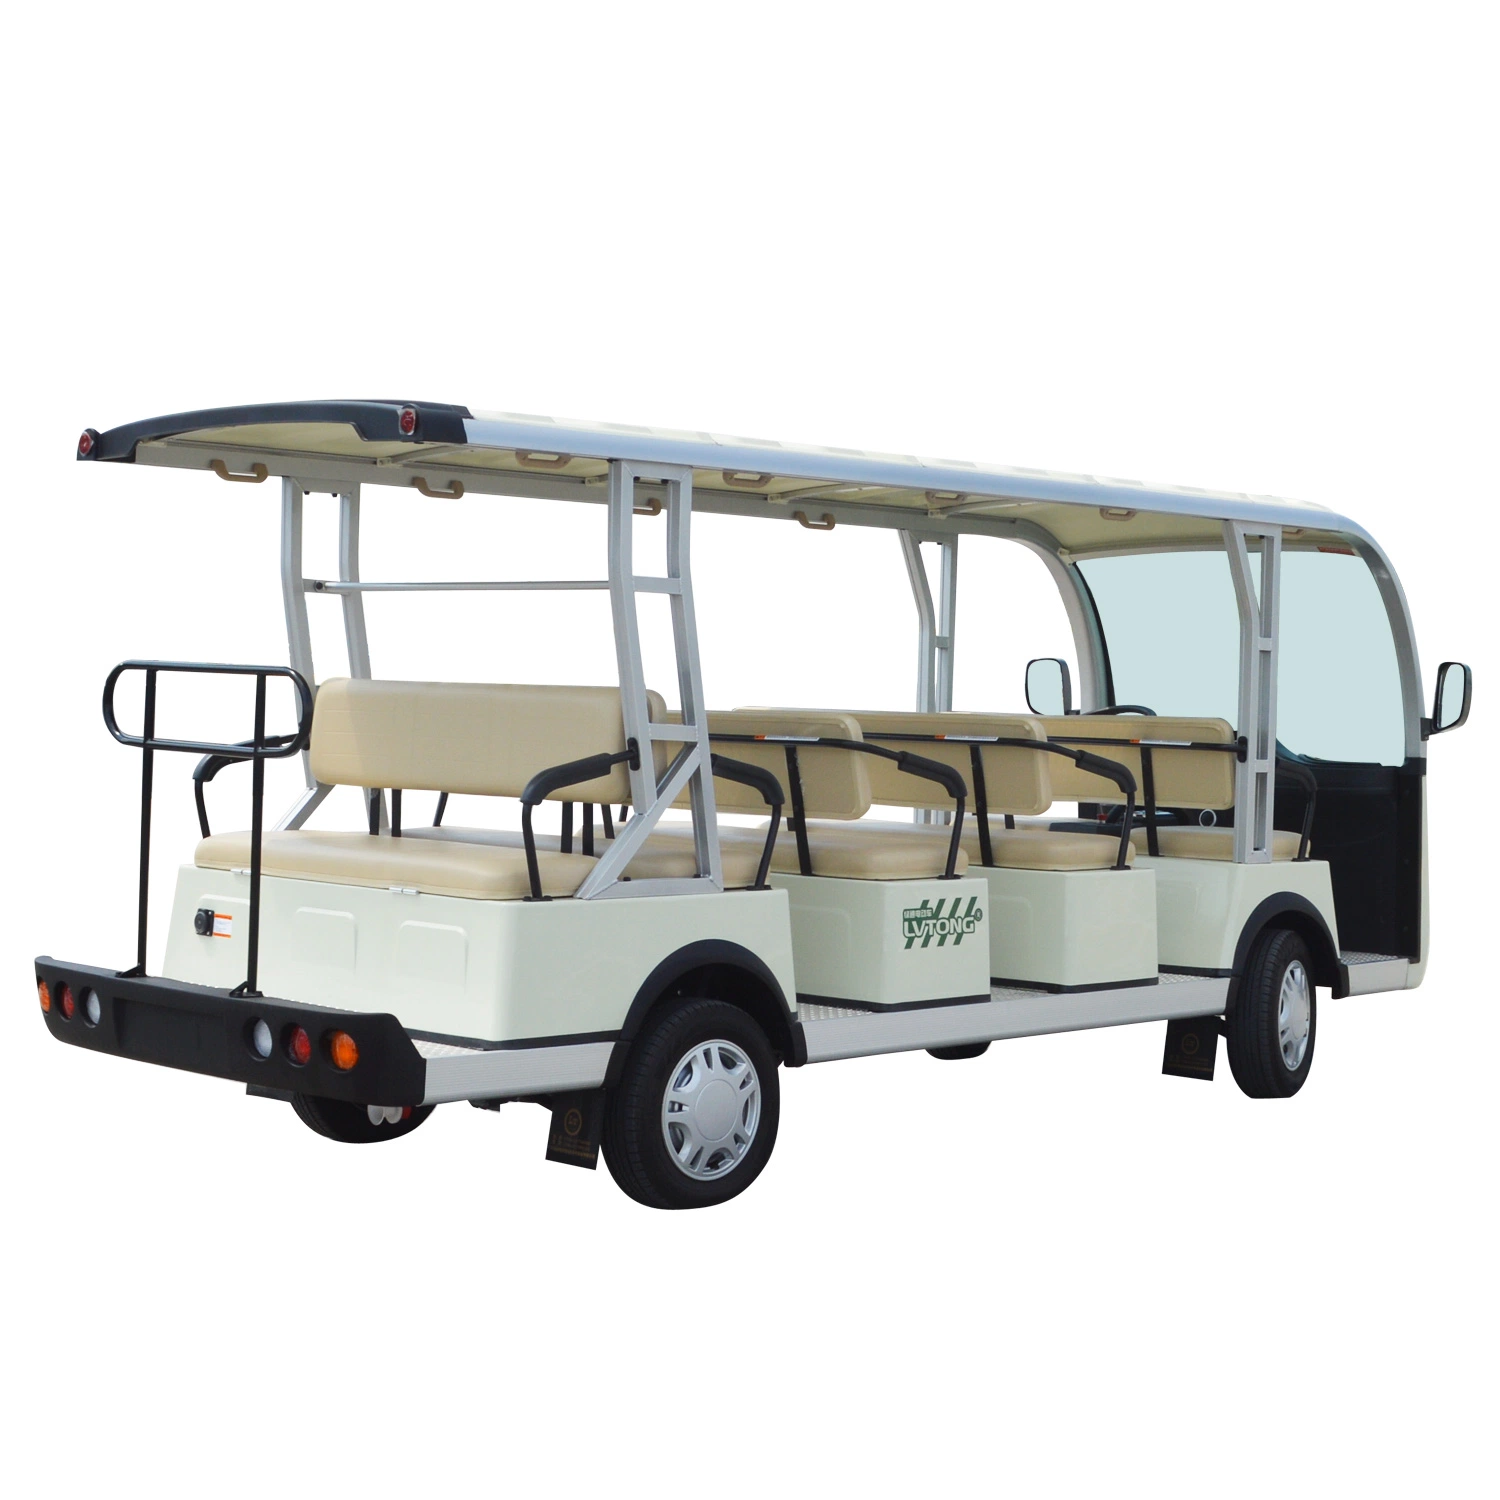 Anti-Fatigue Luxury Stable Quality Safety, Low Speed, Easy Handle New Energy Electric Sightseeing Bus (LT-S14)